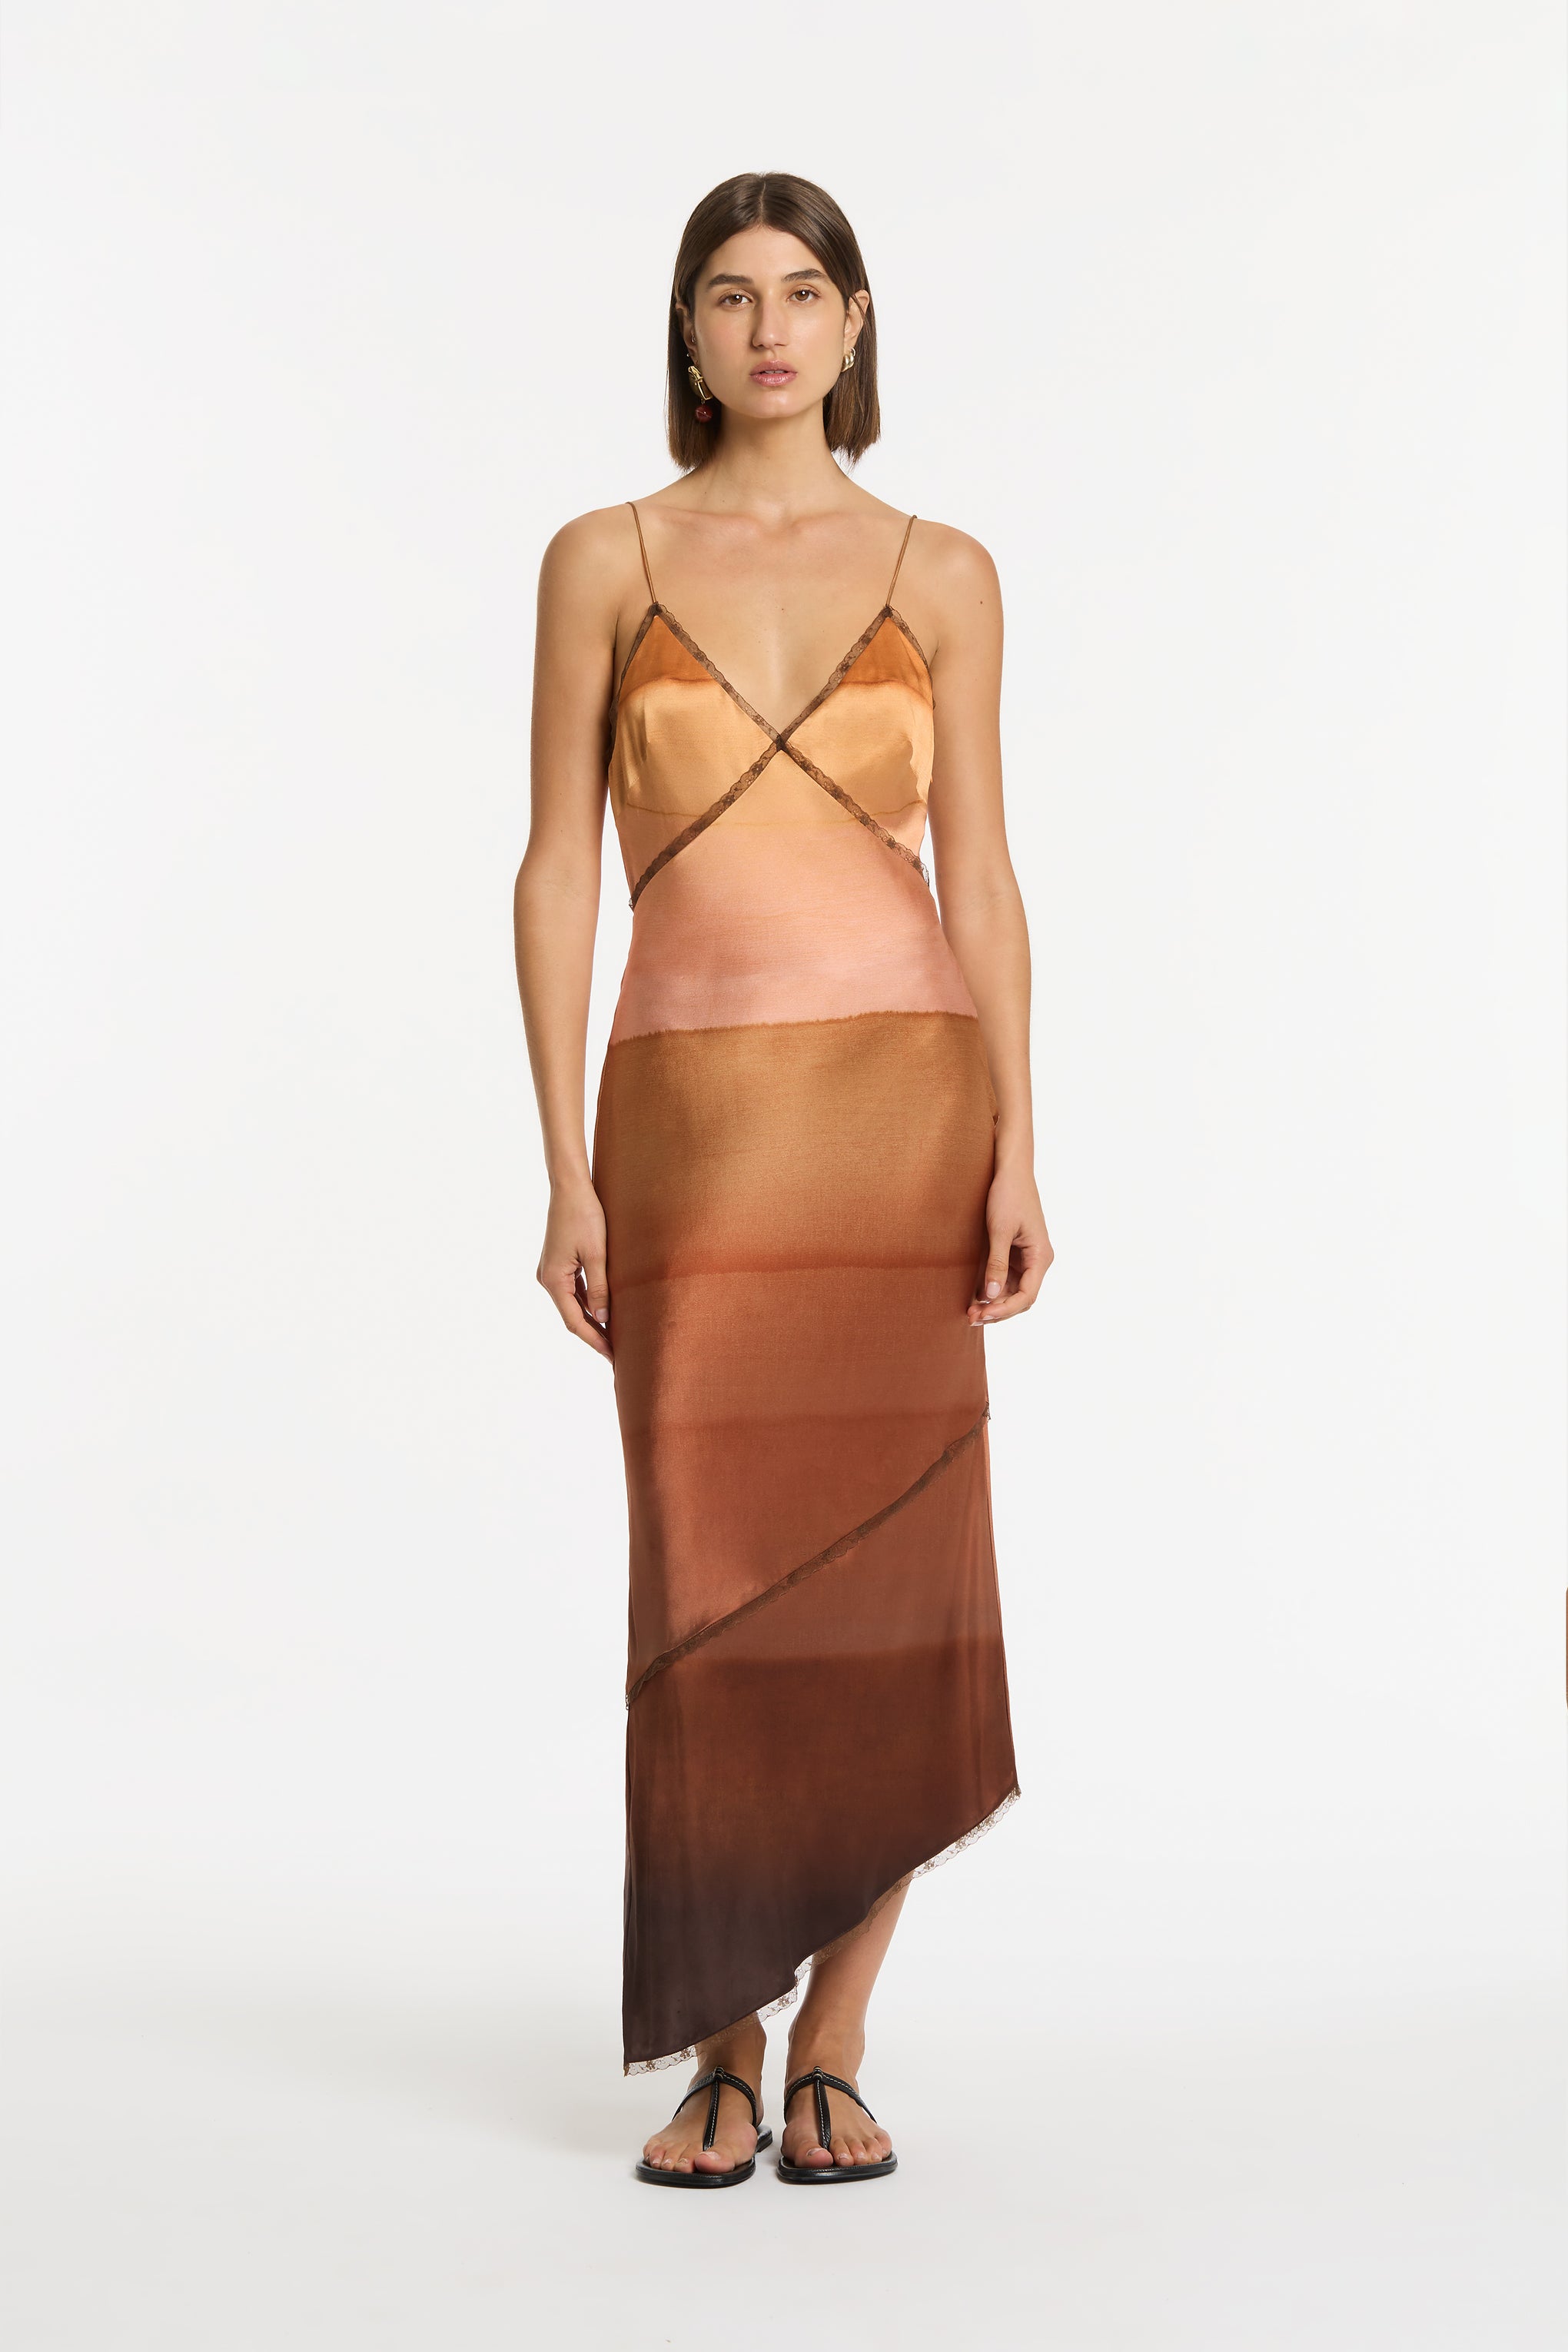 SIR. Martina V Neck Slip Dress in Ombre available at The New Trend Australia.